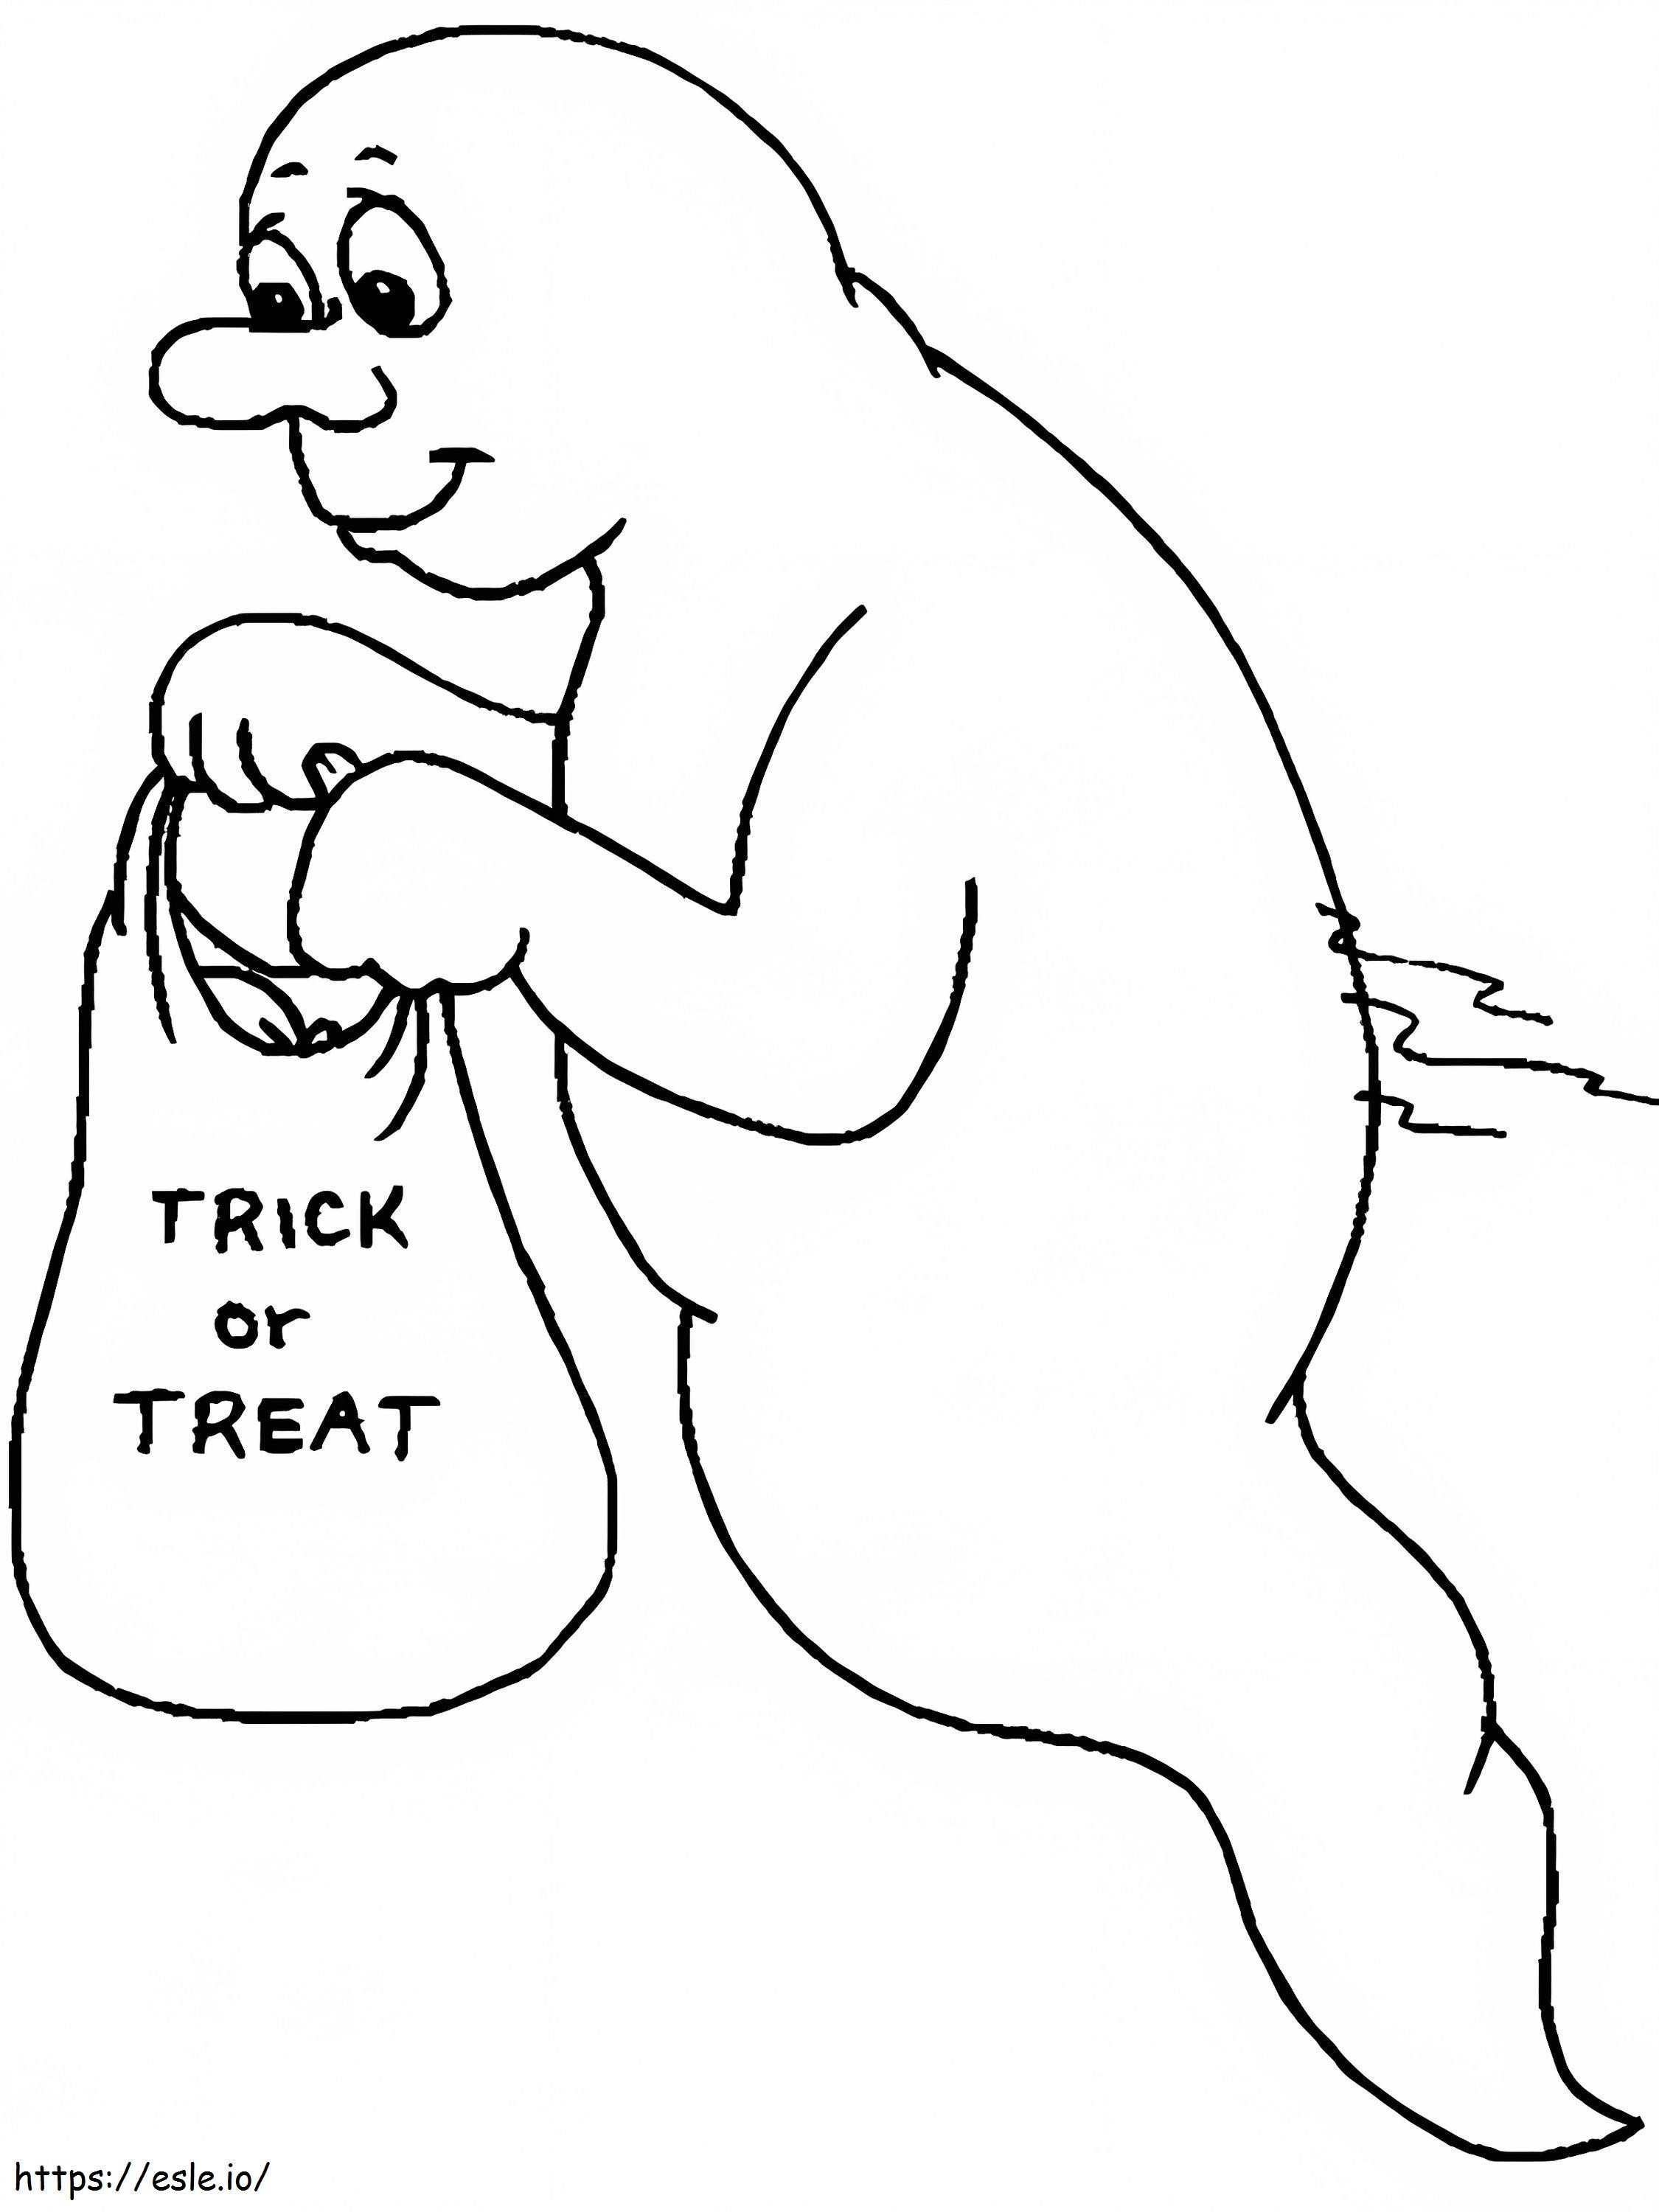 Goofy Ghost Goes Trick Or Treating coloring page